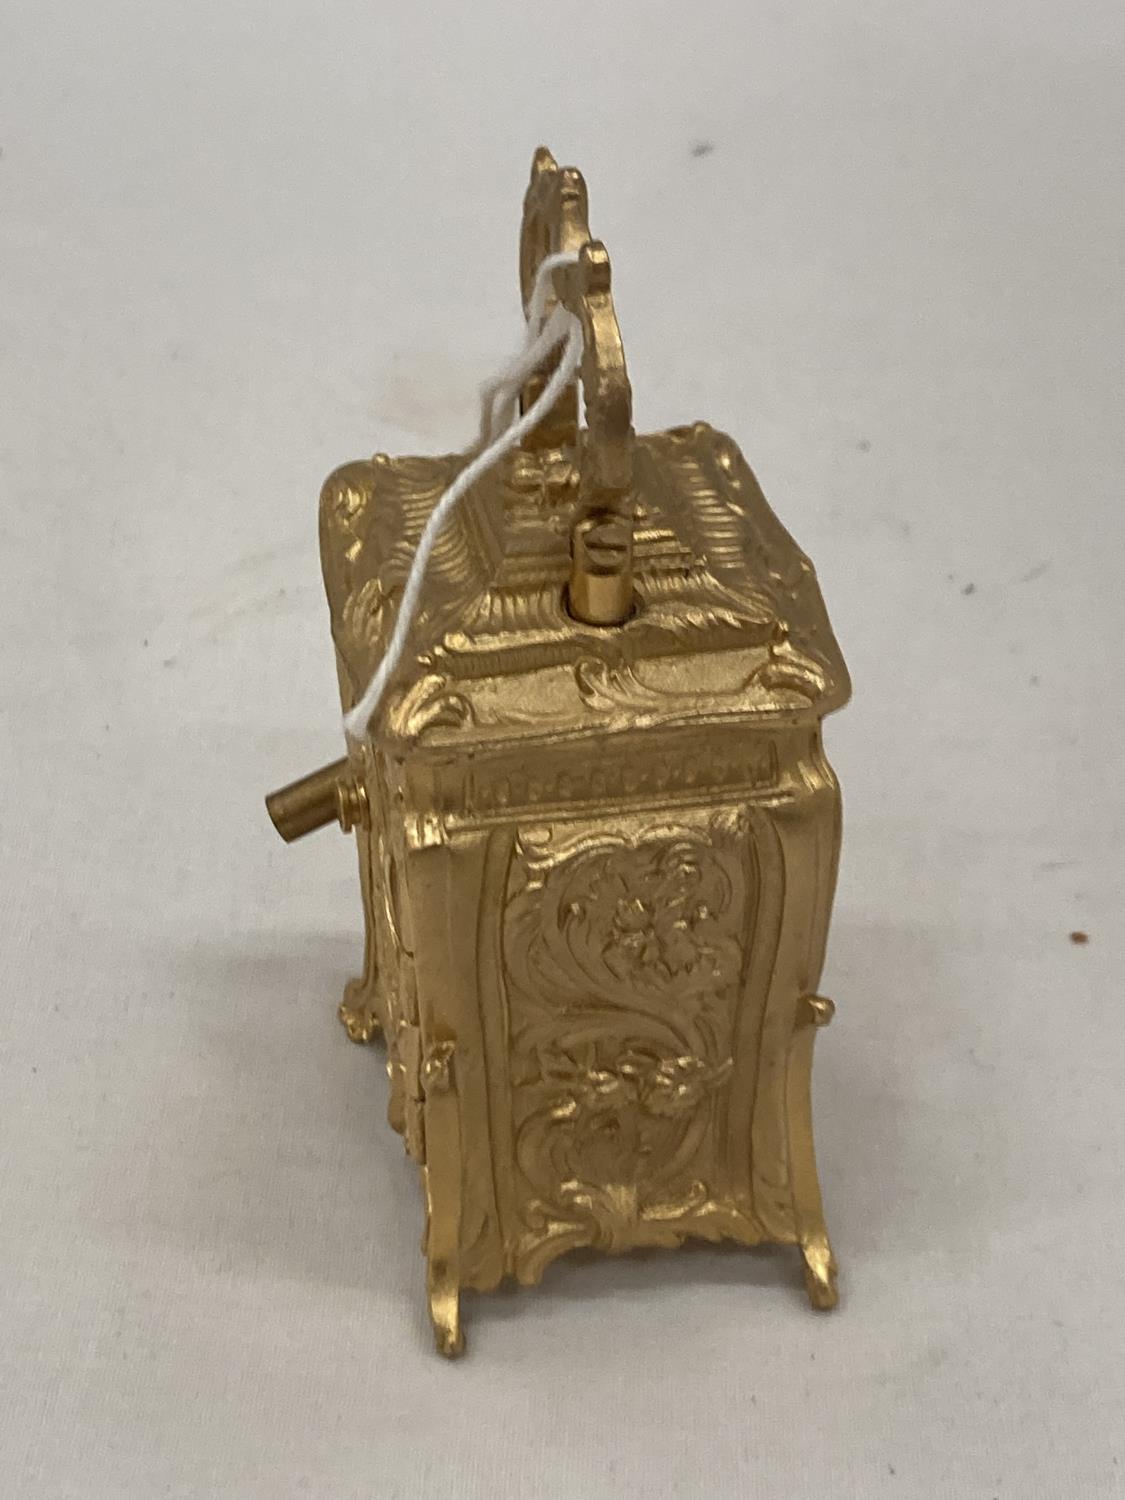 A MINIATURE GILDED FRENCH CLOCK WITH KEY HEIGHT 3.5" SEEN WORKING BUT NO WARRANTY - Image 2 of 6